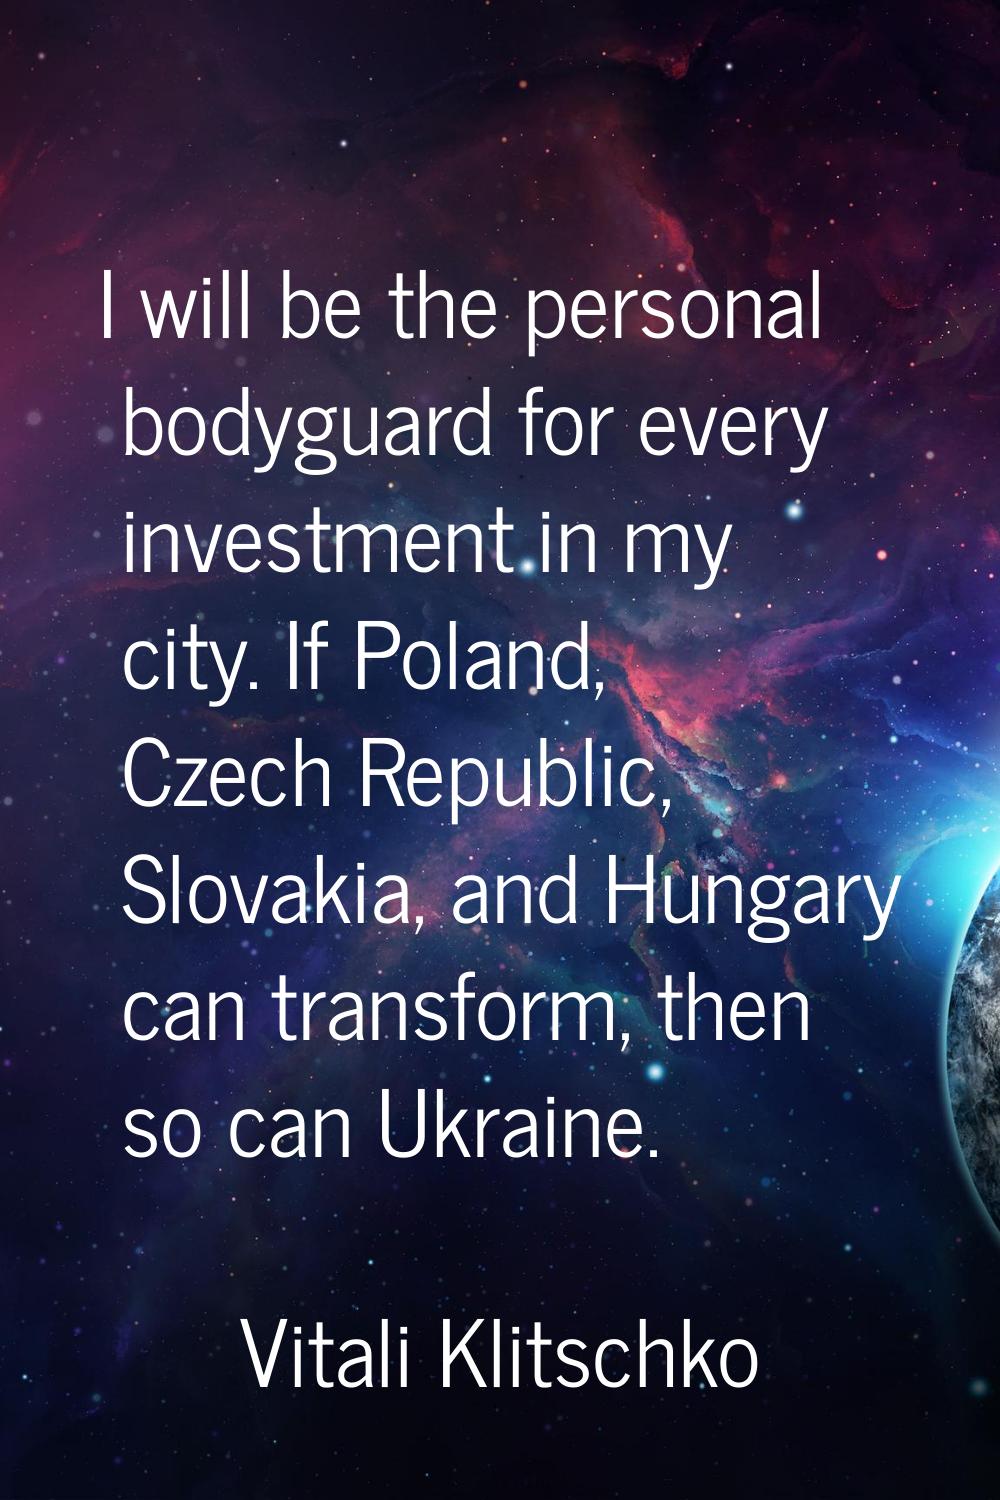 I will be the personal bodyguard for every investment in my city. If Poland, Czech Republic, Slovak